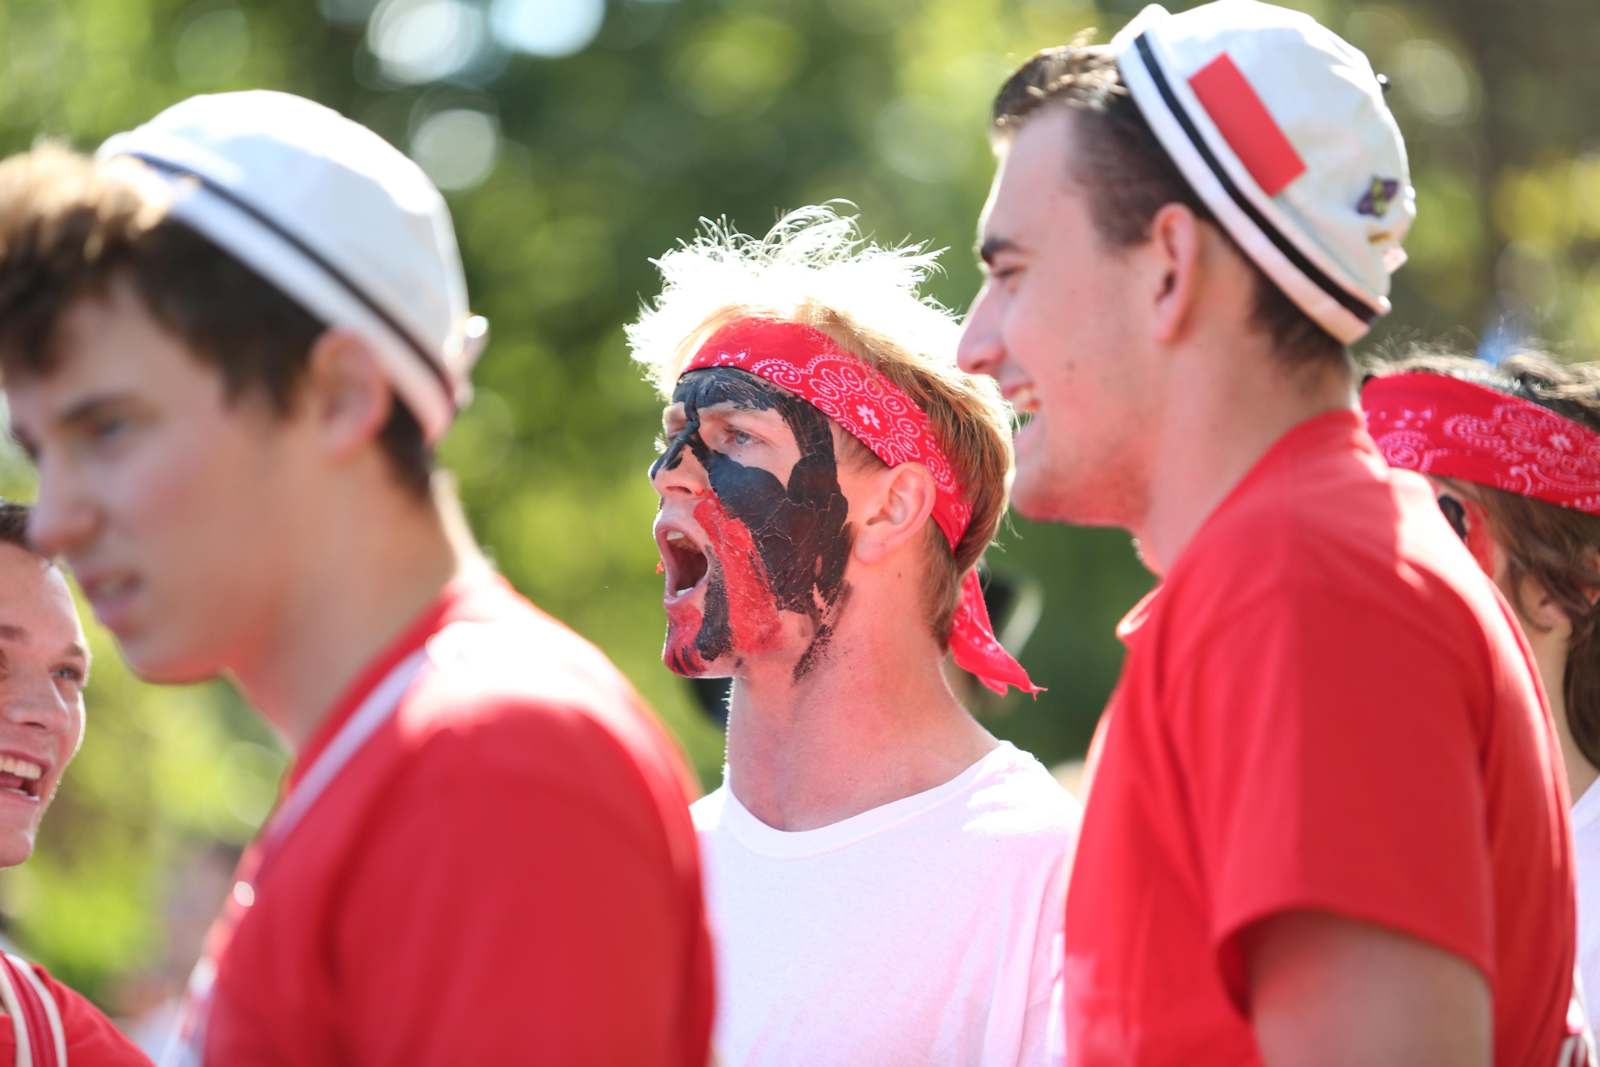 a group of men wearing red shirts and black face paint